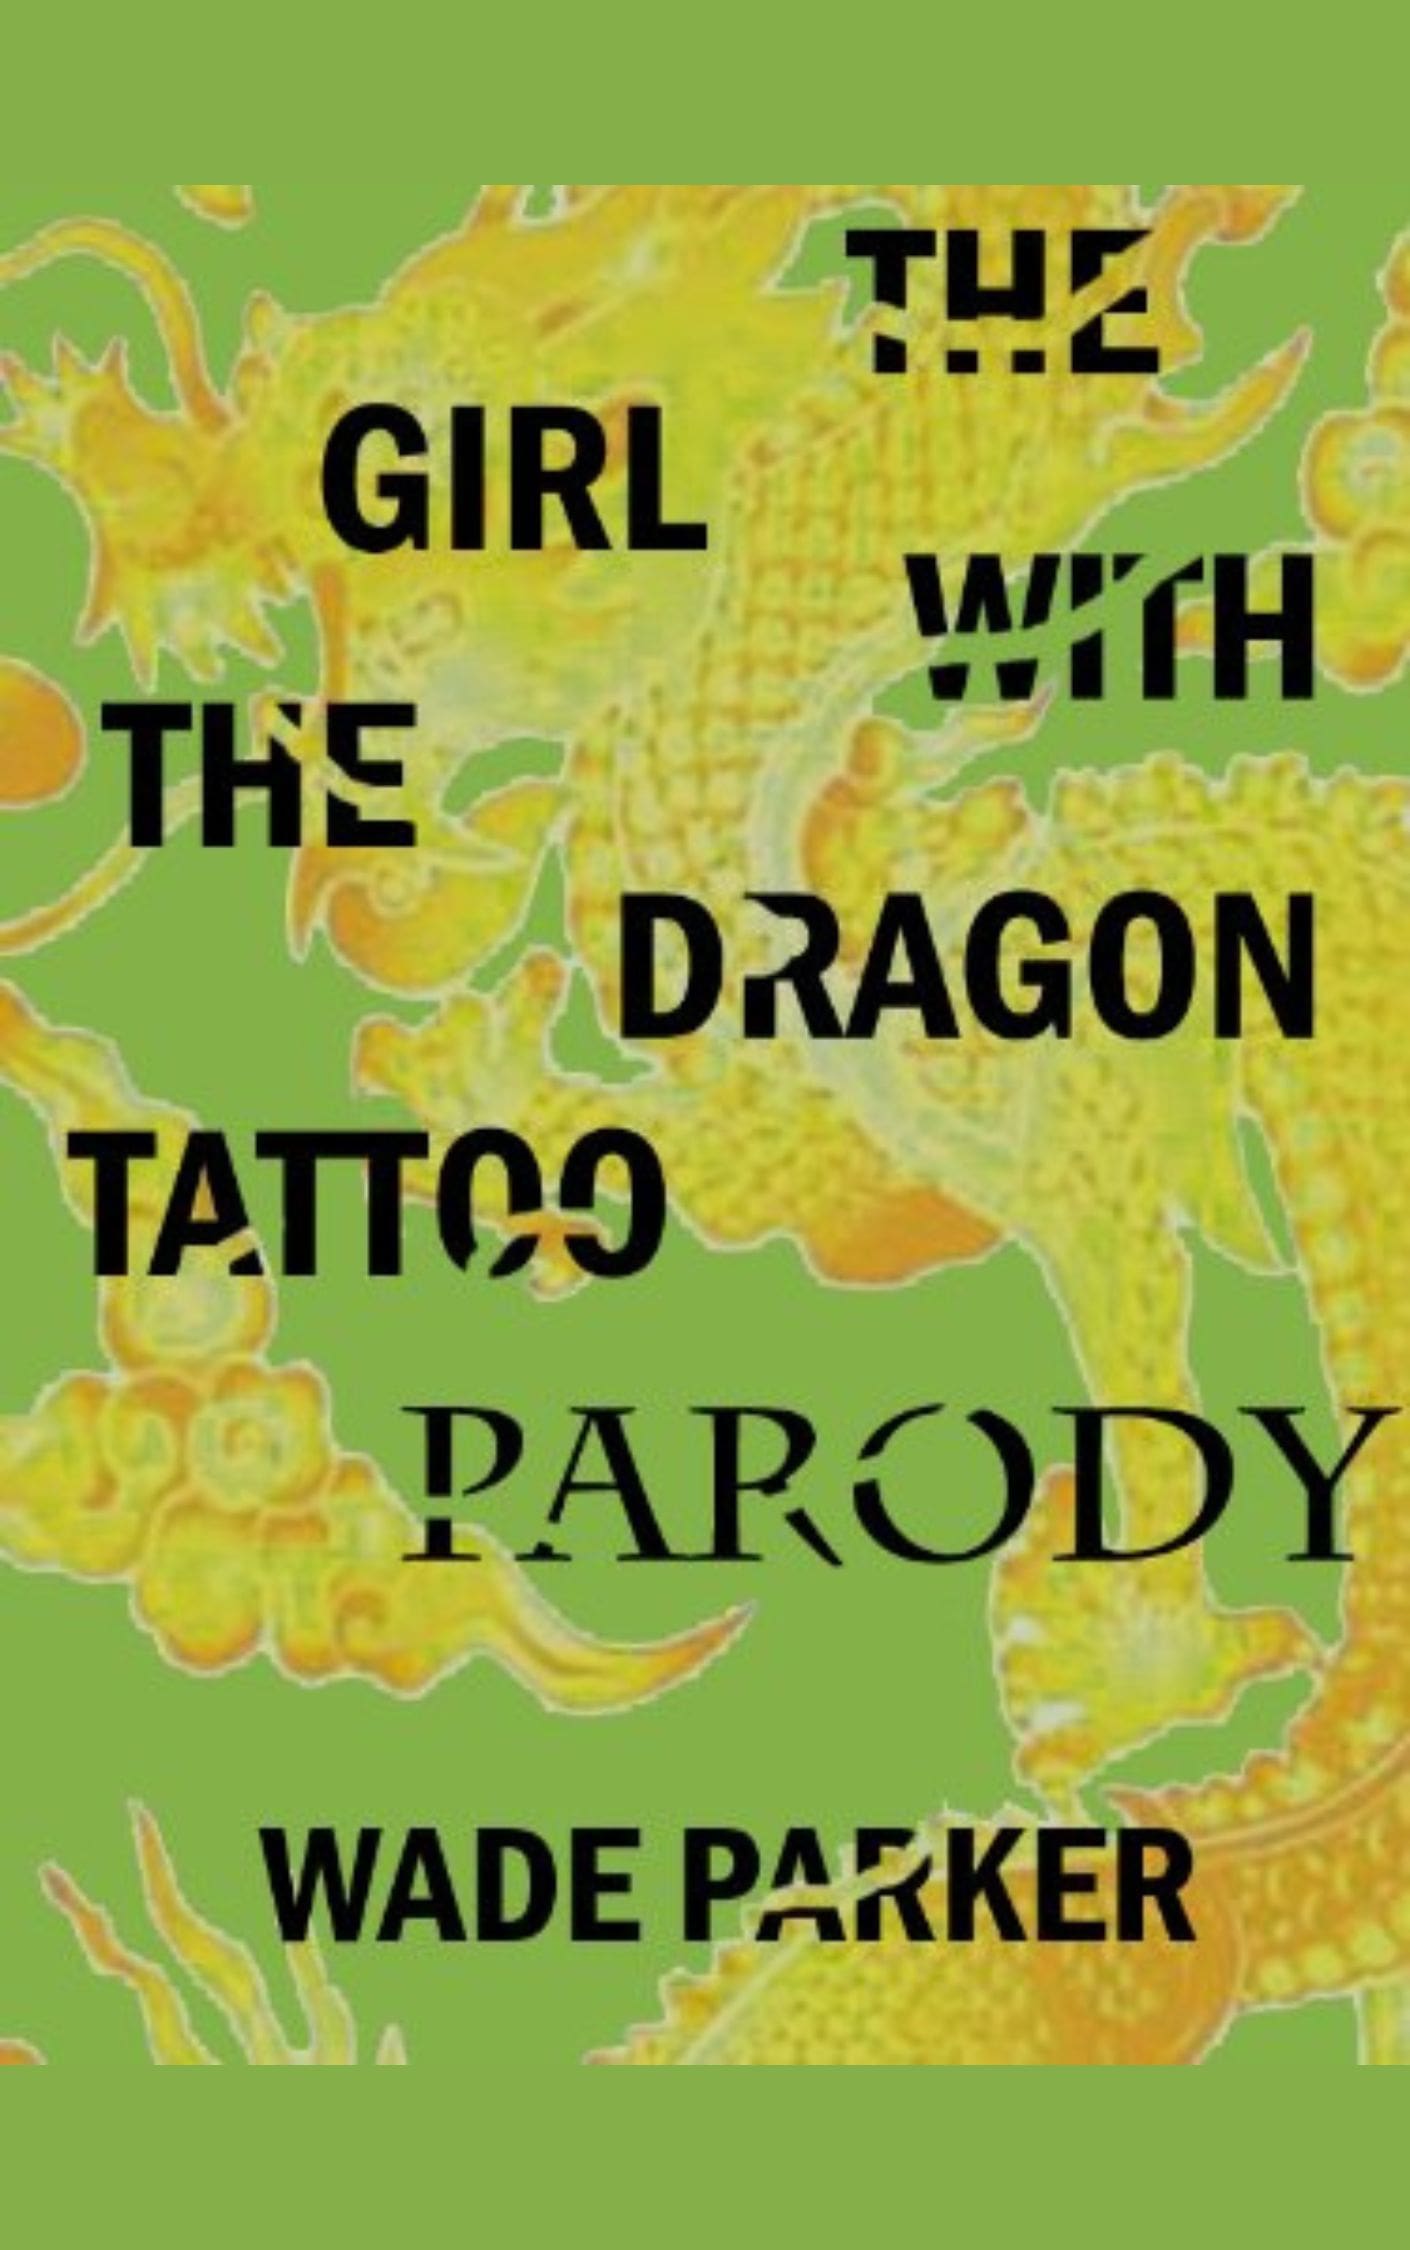 The Girl With The Dragon Tattoo Parody